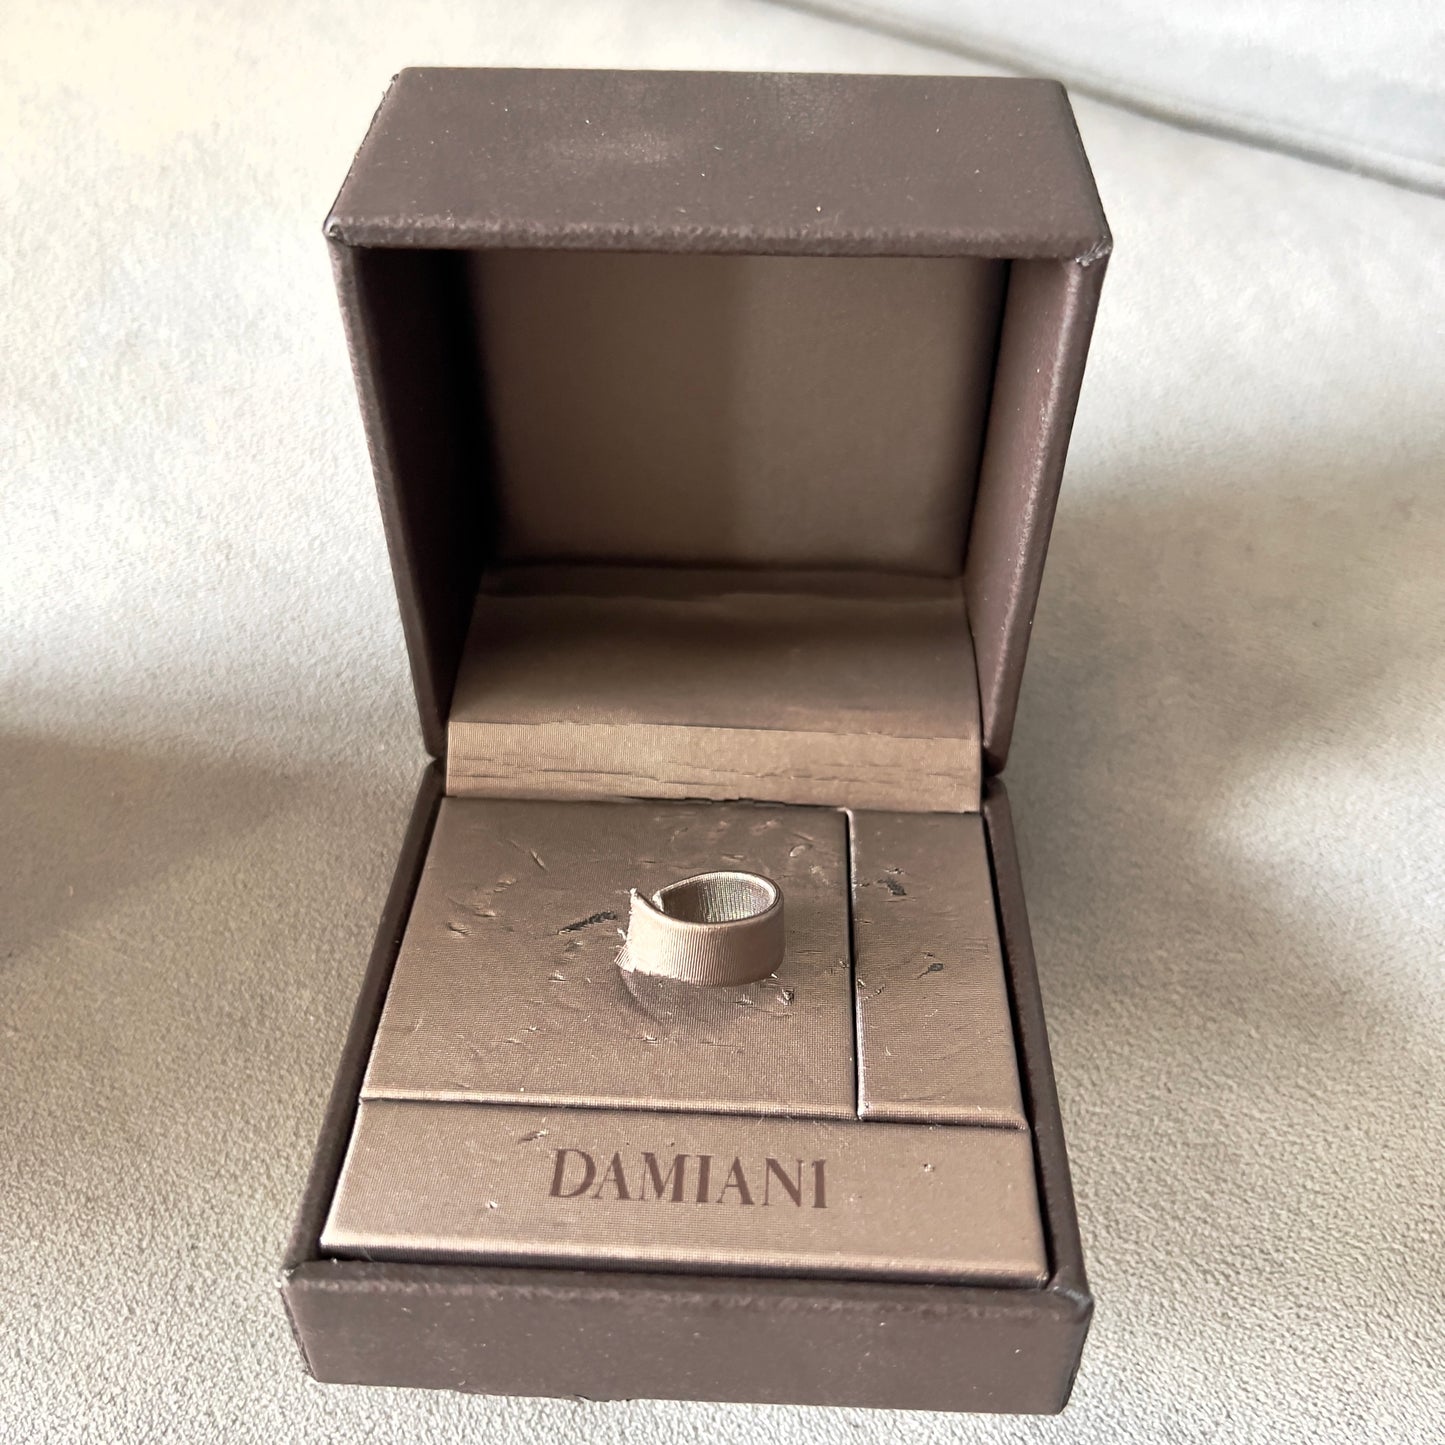 DAMIANI Ring Box + Outer Box + Booklet 3.60x3.60x2.80 inches